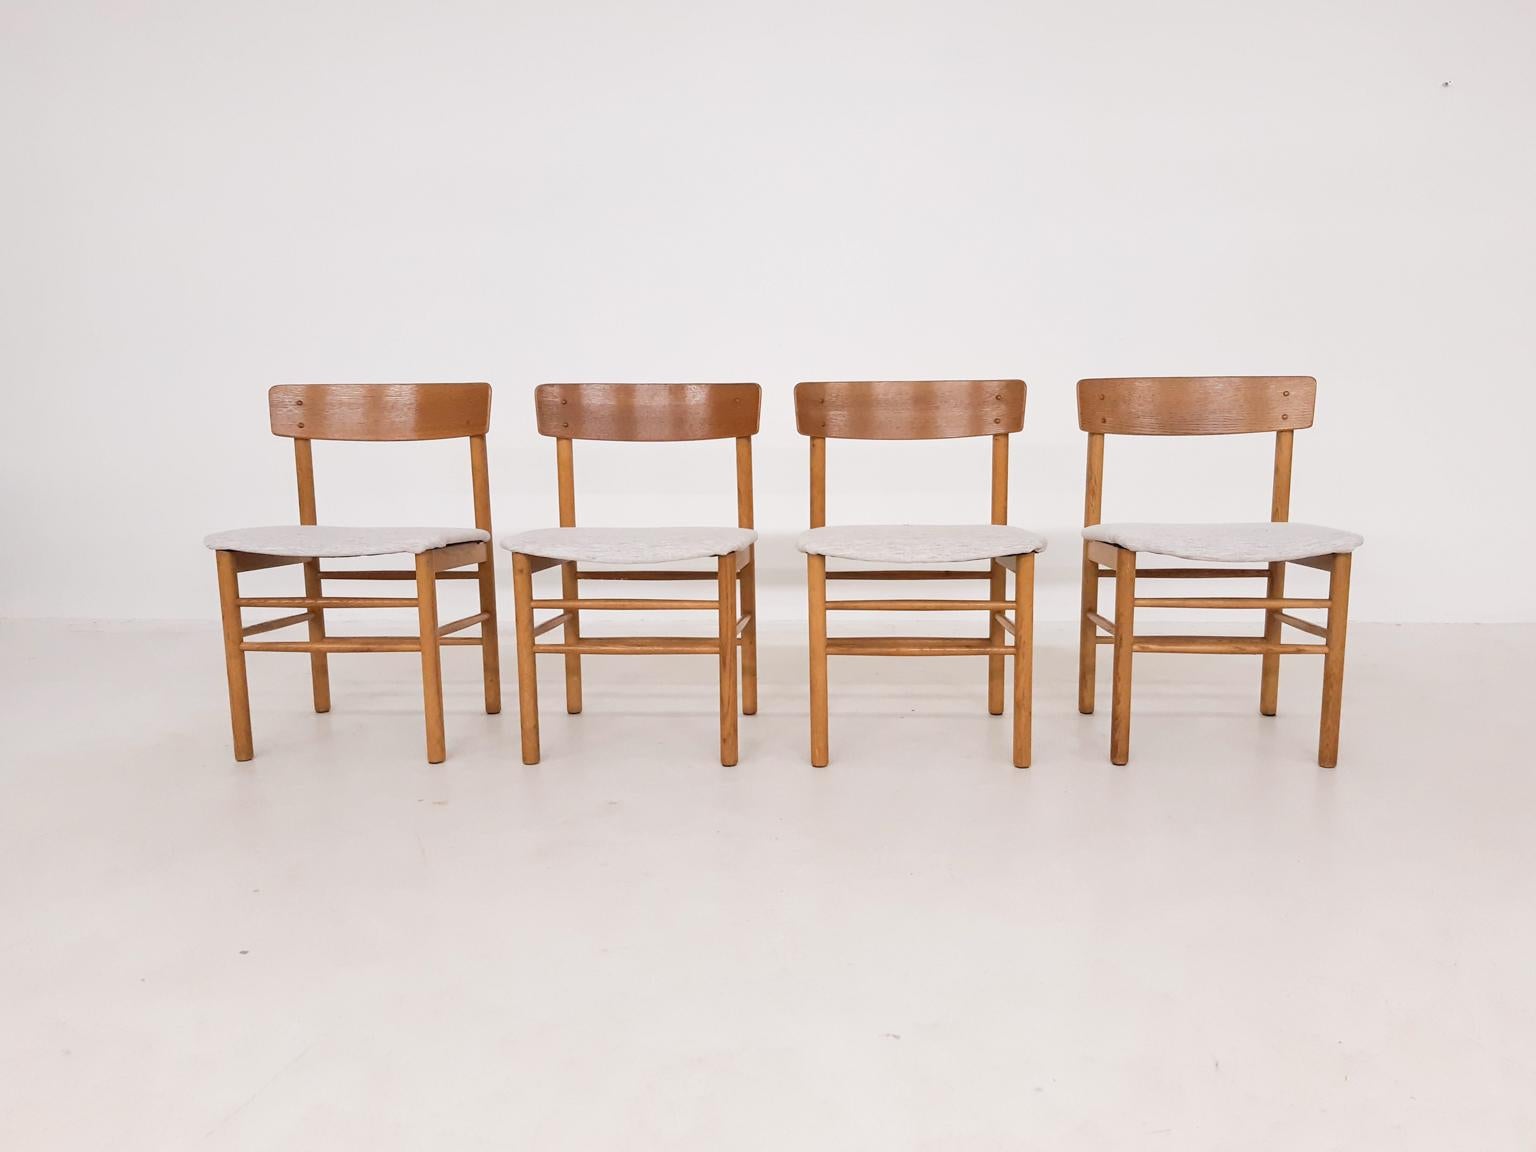 A set of 4 oak dining chairs in the style of Børge Mogensen his J39 Shaker chair.
Made in Denmark in the 1960s. The chairs are very similar to the J39 chair by Mogensen and will a great match with any dining table from the Danish modern era.
They